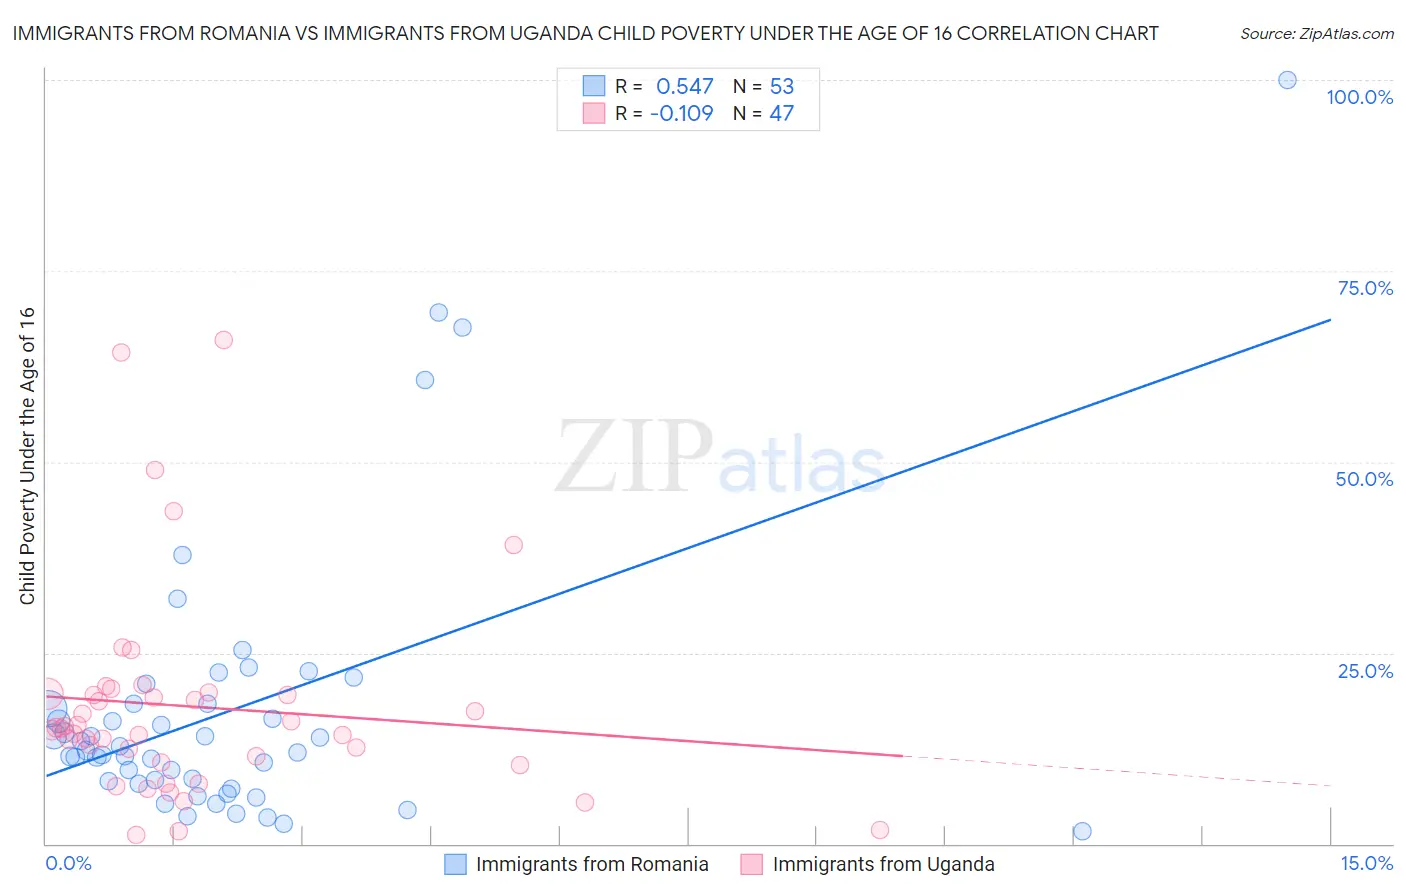 Immigrants from Romania vs Immigrants from Uganda Child Poverty Under the Age of 16